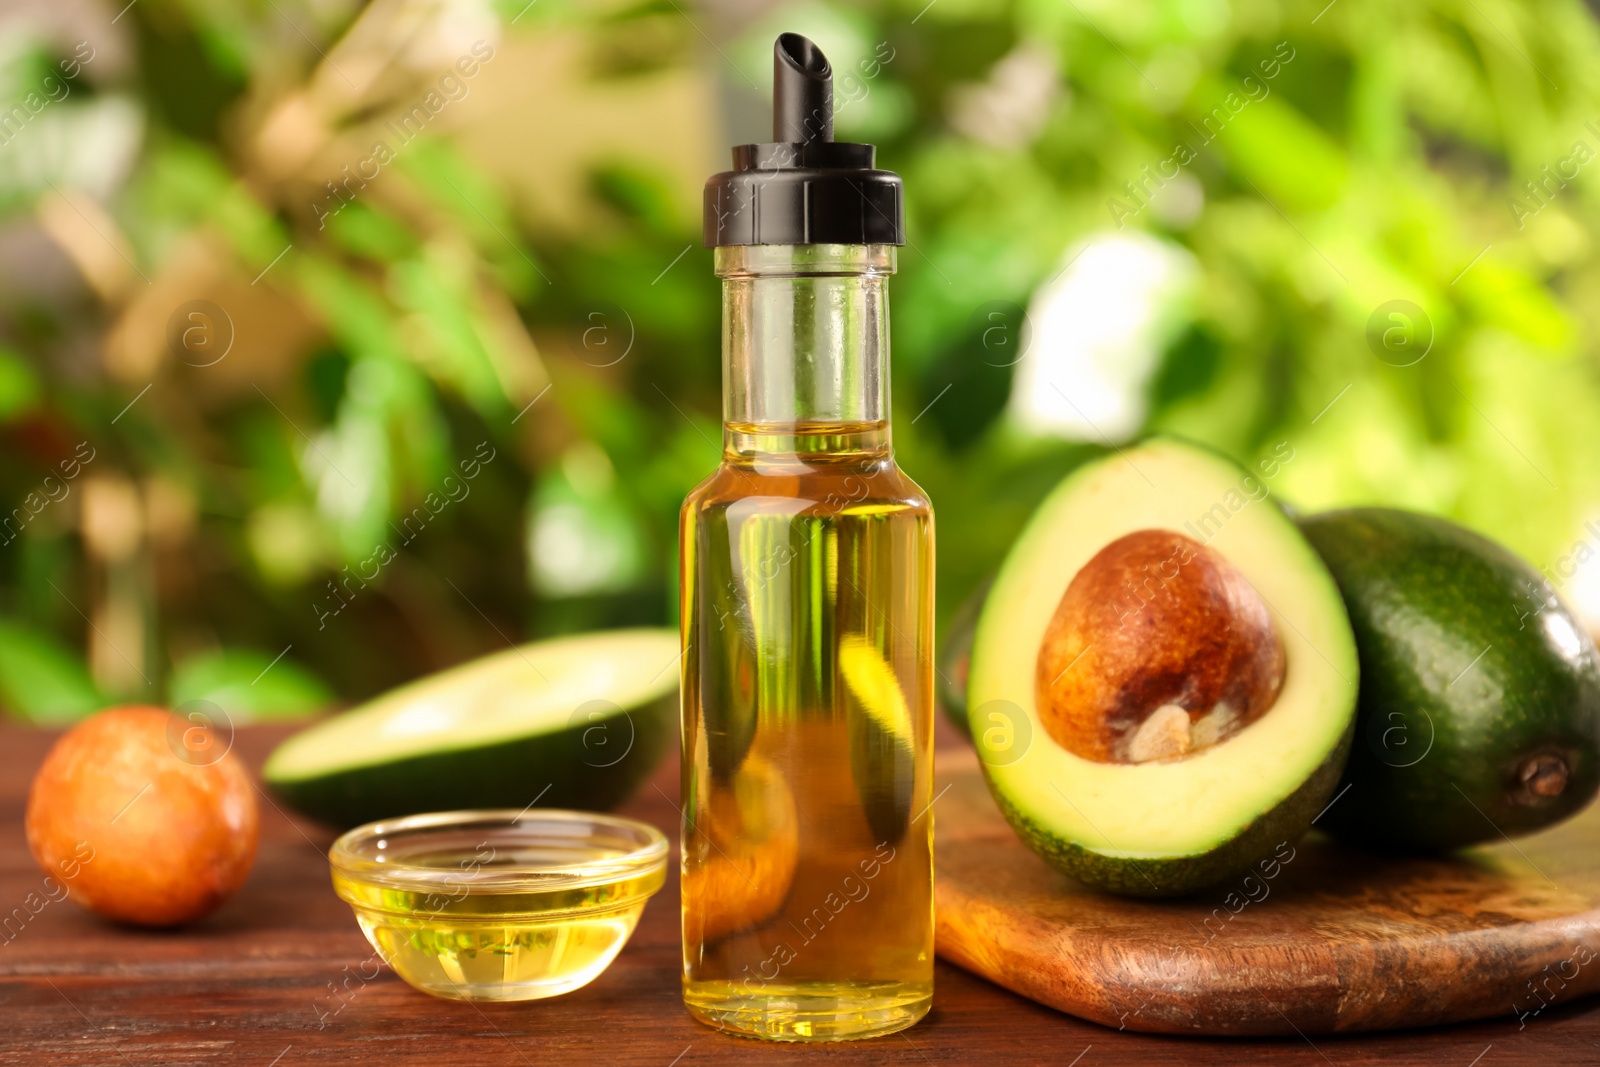 Photo of Glass bottle of cooking oil and fresh avocados on wooden table against blurred green background